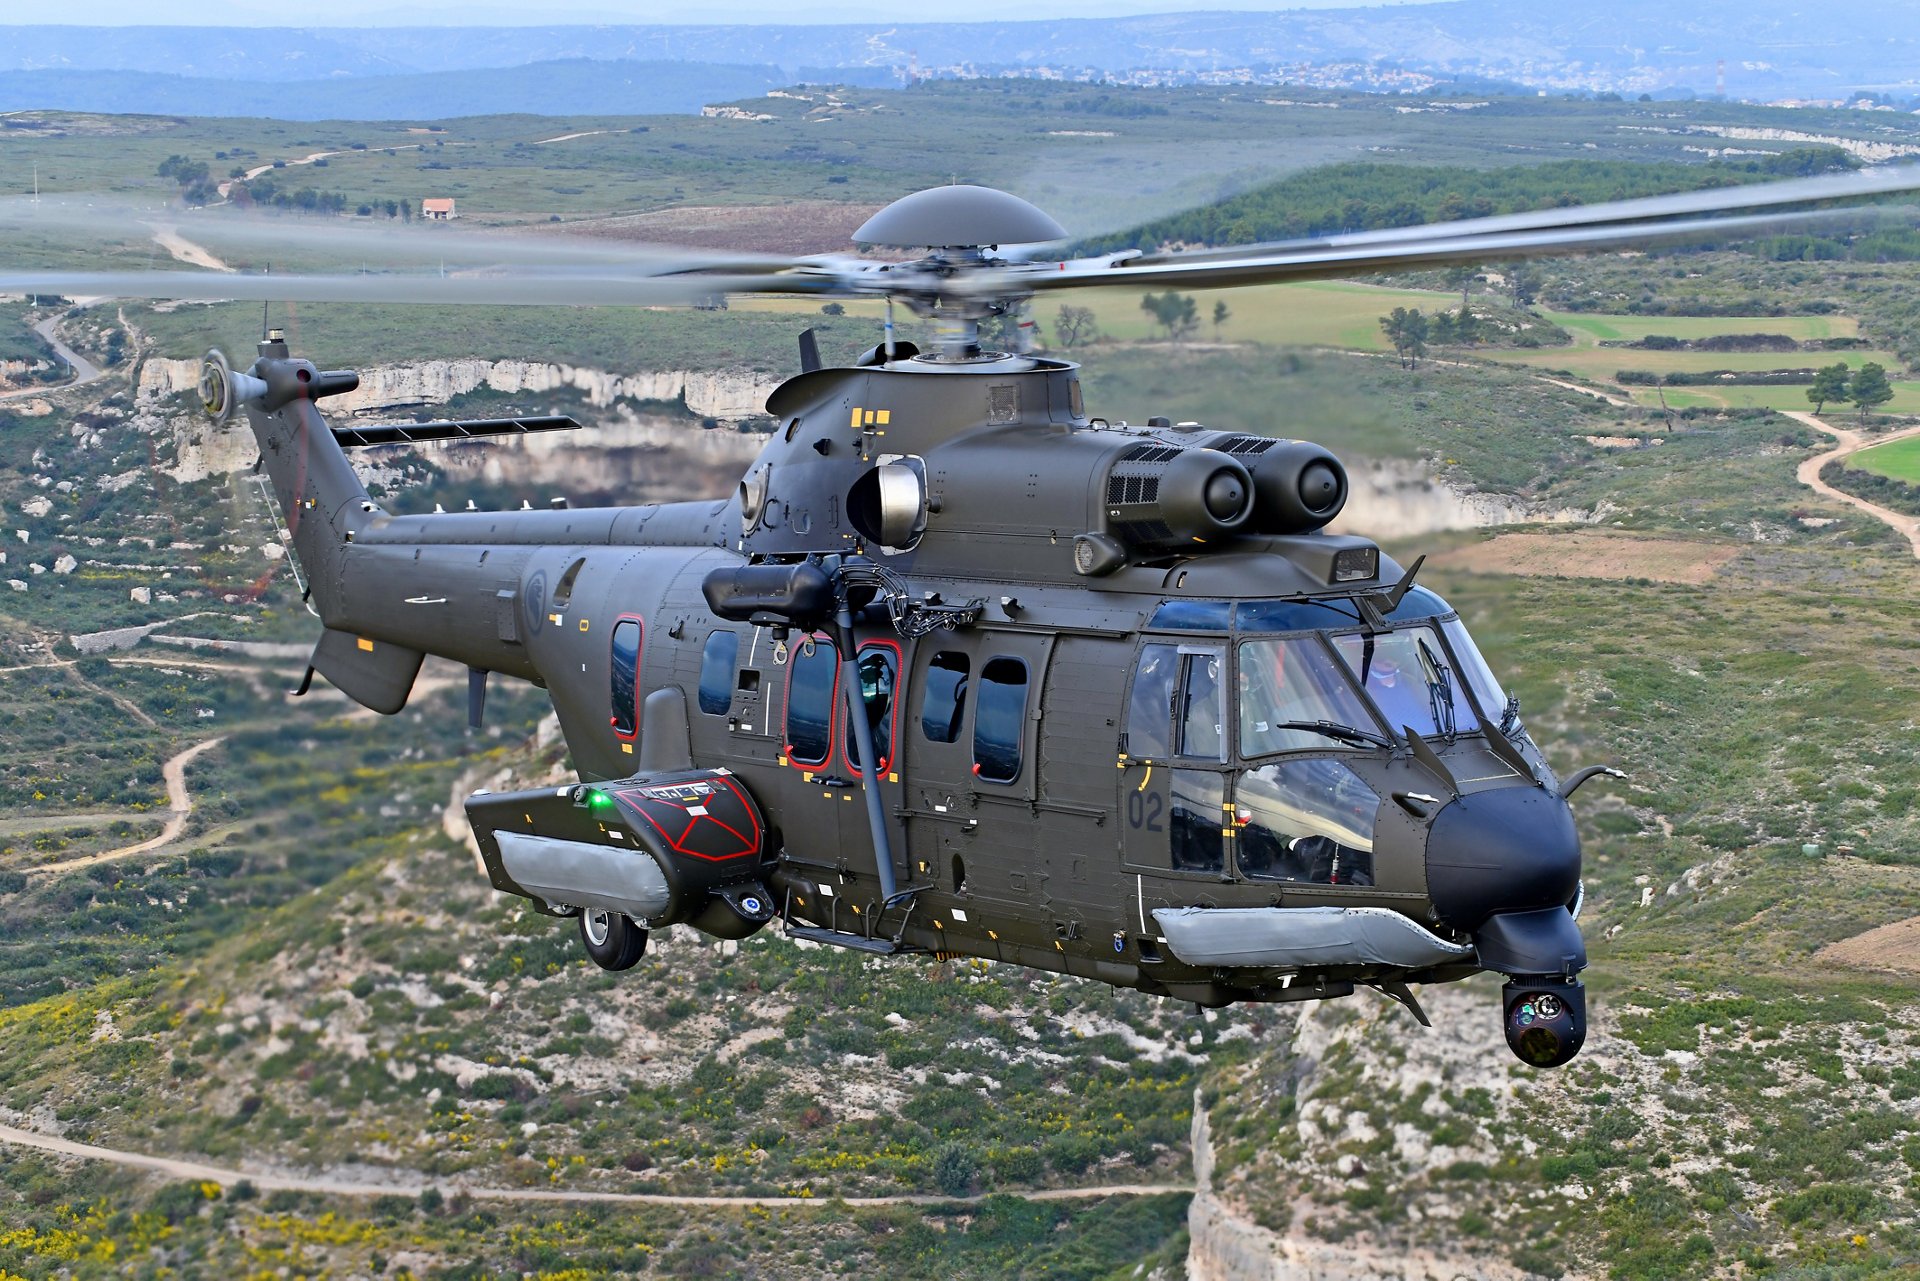 Republic of Singapore Air Force H225M medium lift helicopter In Marignane, southern France.